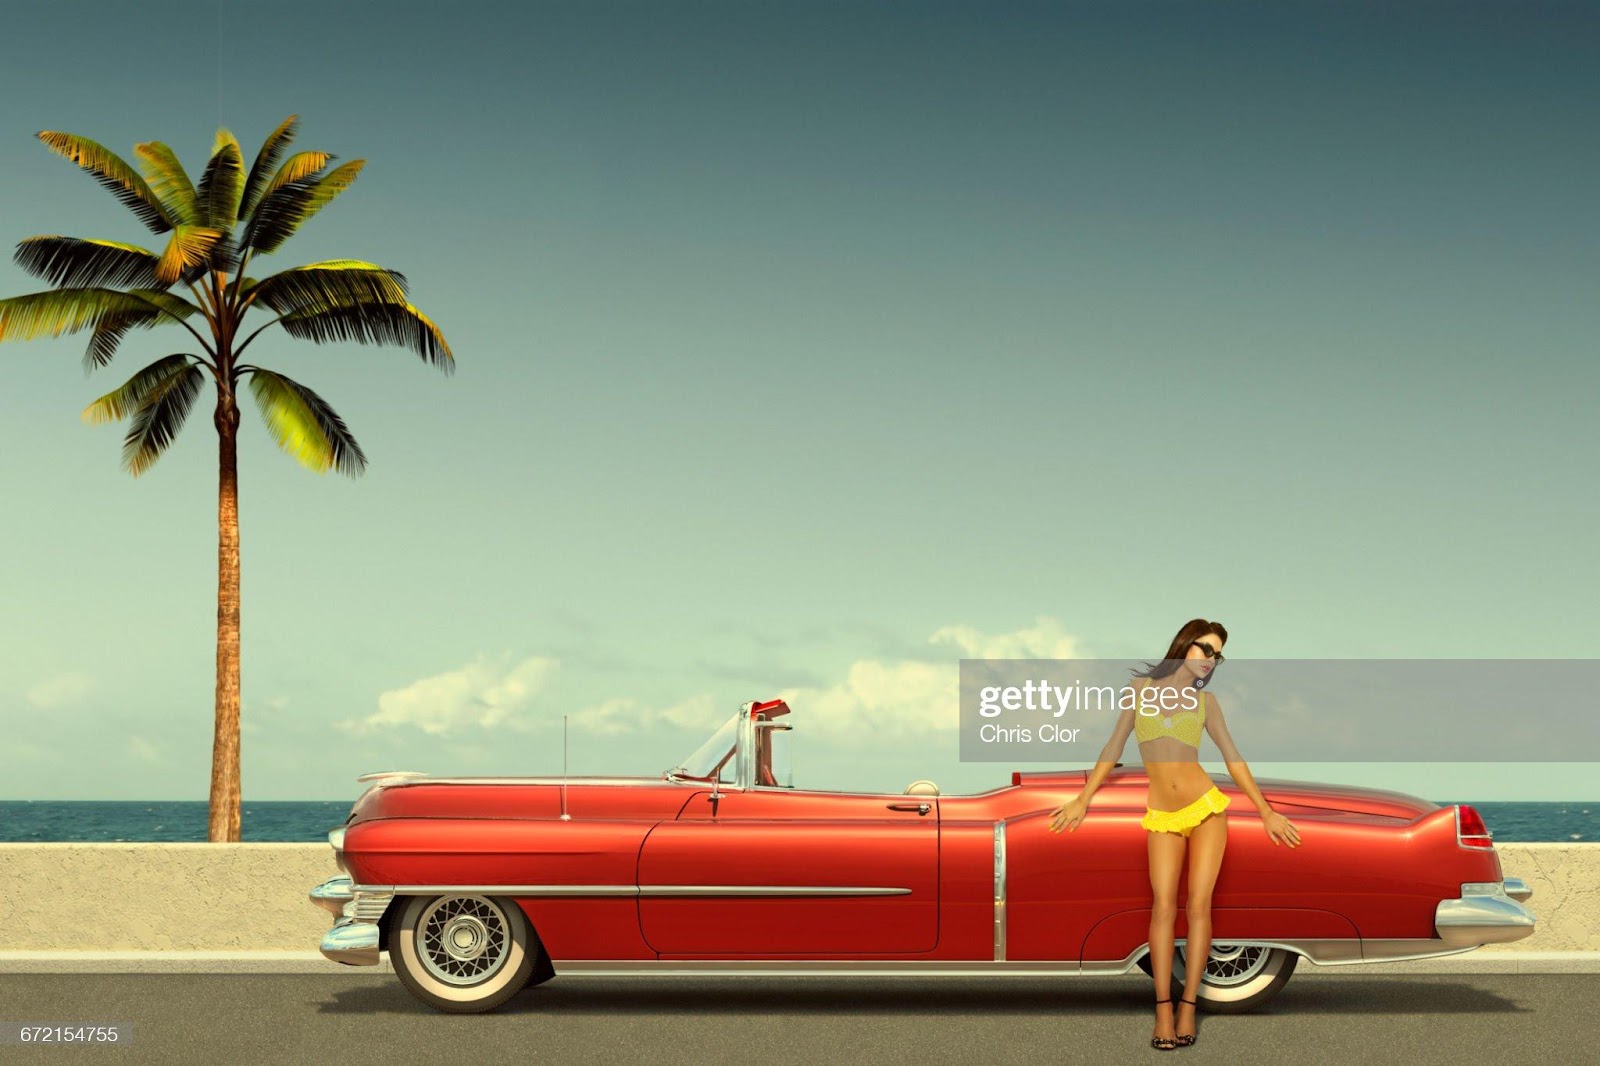 C:\Users\Valerio\Desktop\caucasian-woman-leaning-on-oldfashioned-convertible-car-at-ocean-picture-id672154755.jpg